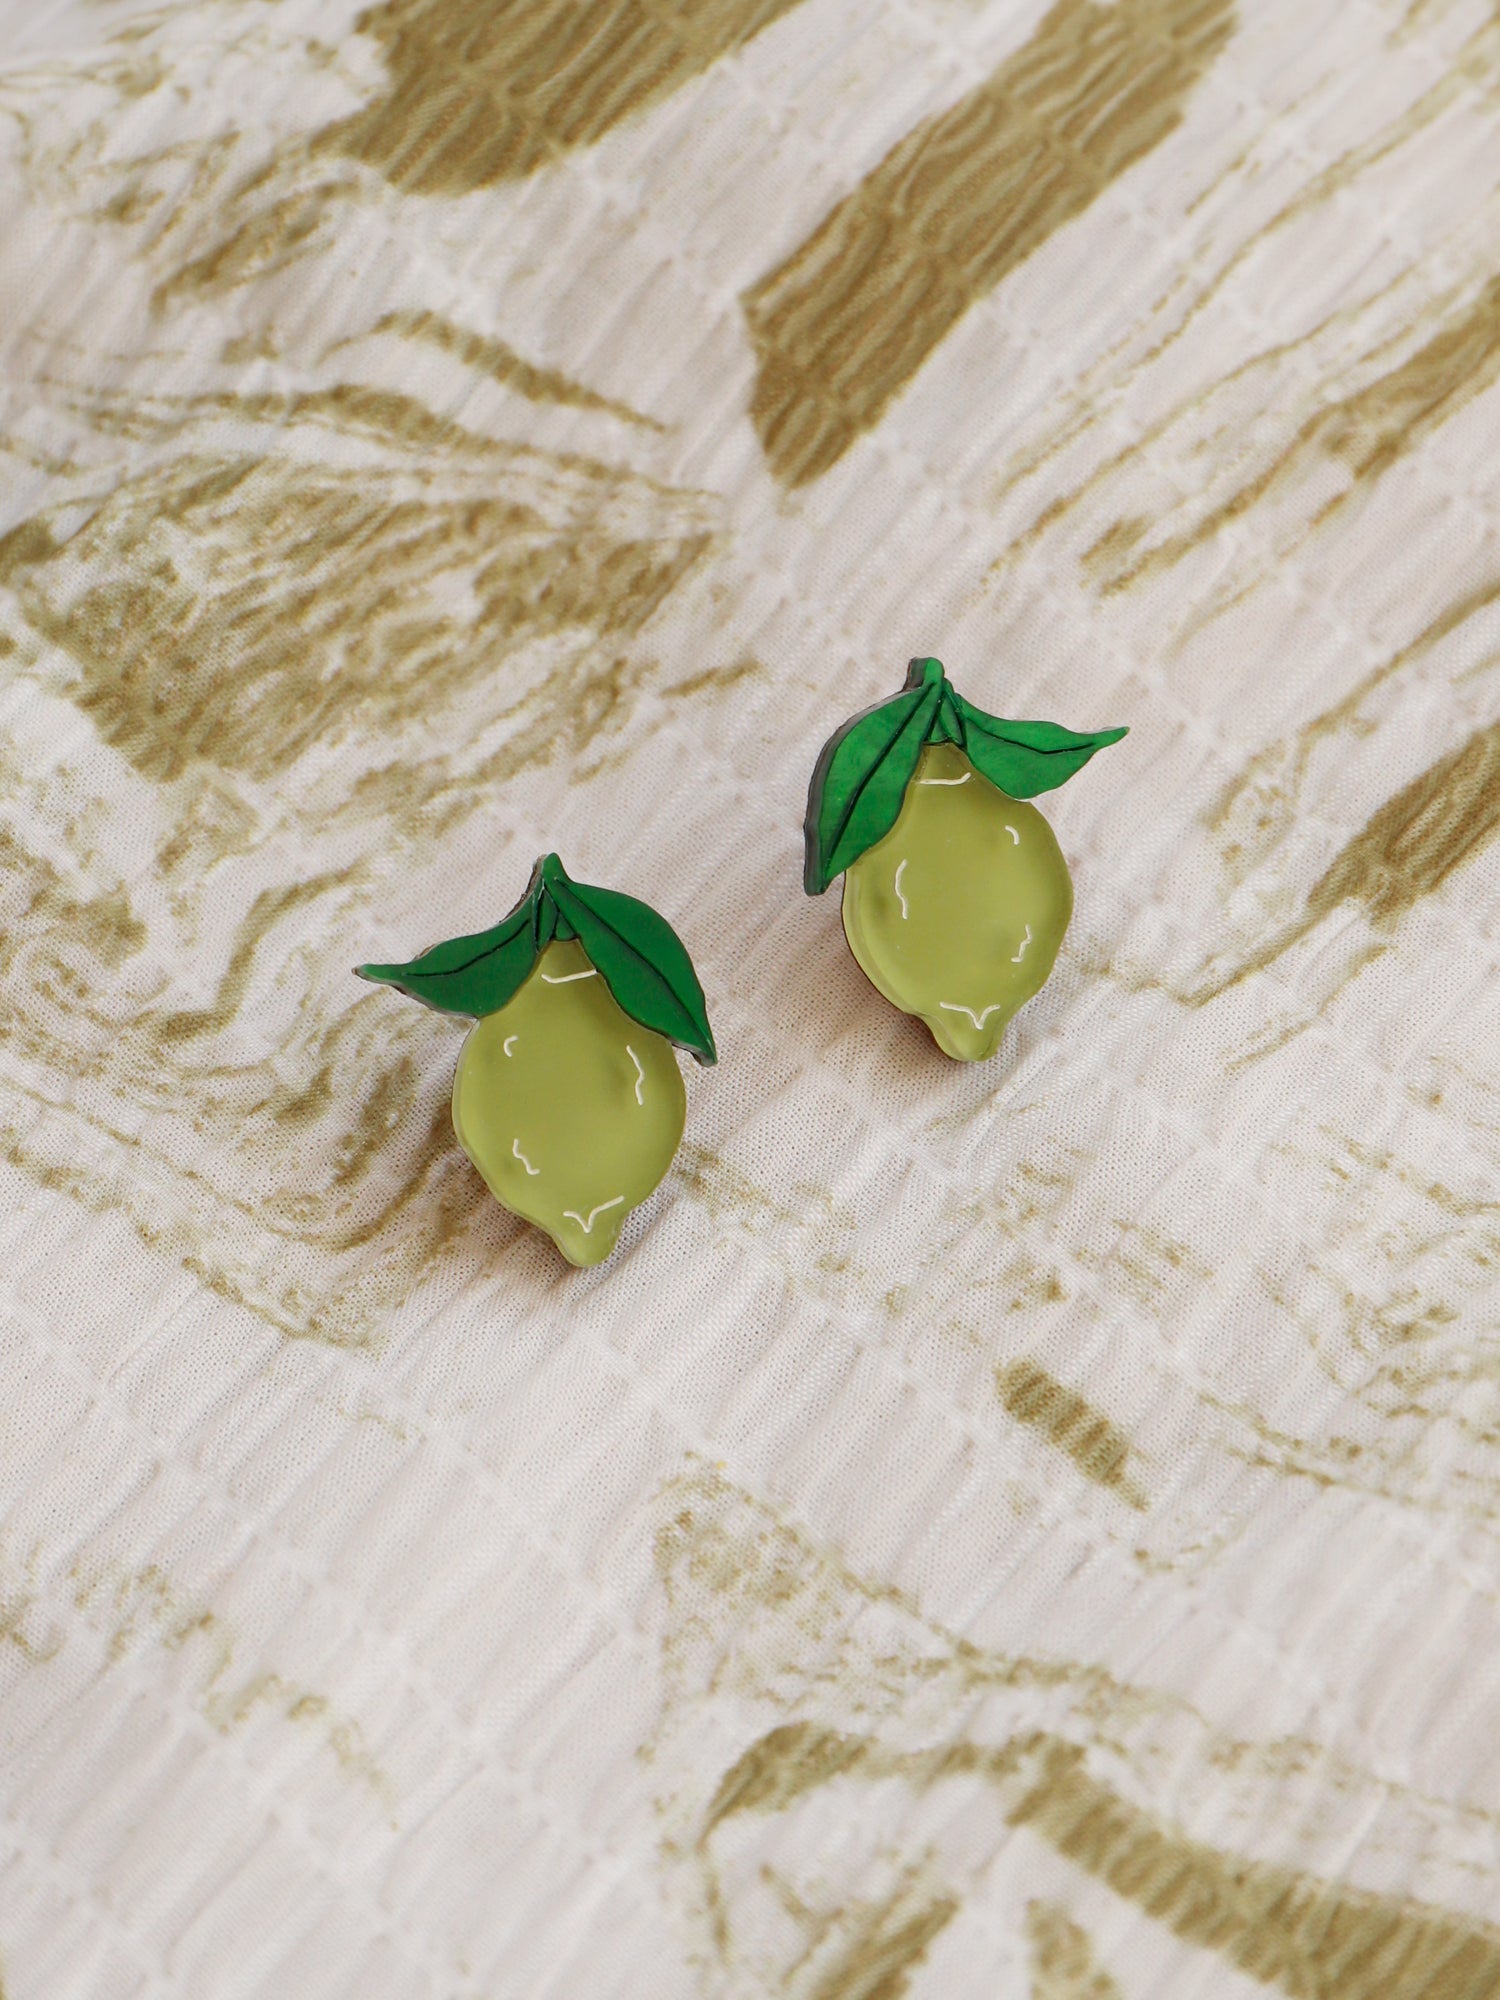 Lime studs made with wood, 64% recycled acrylic and hand-inked details with sterling silver earring posts & butterflies. Handmade in the UK at Wolf & Moon.